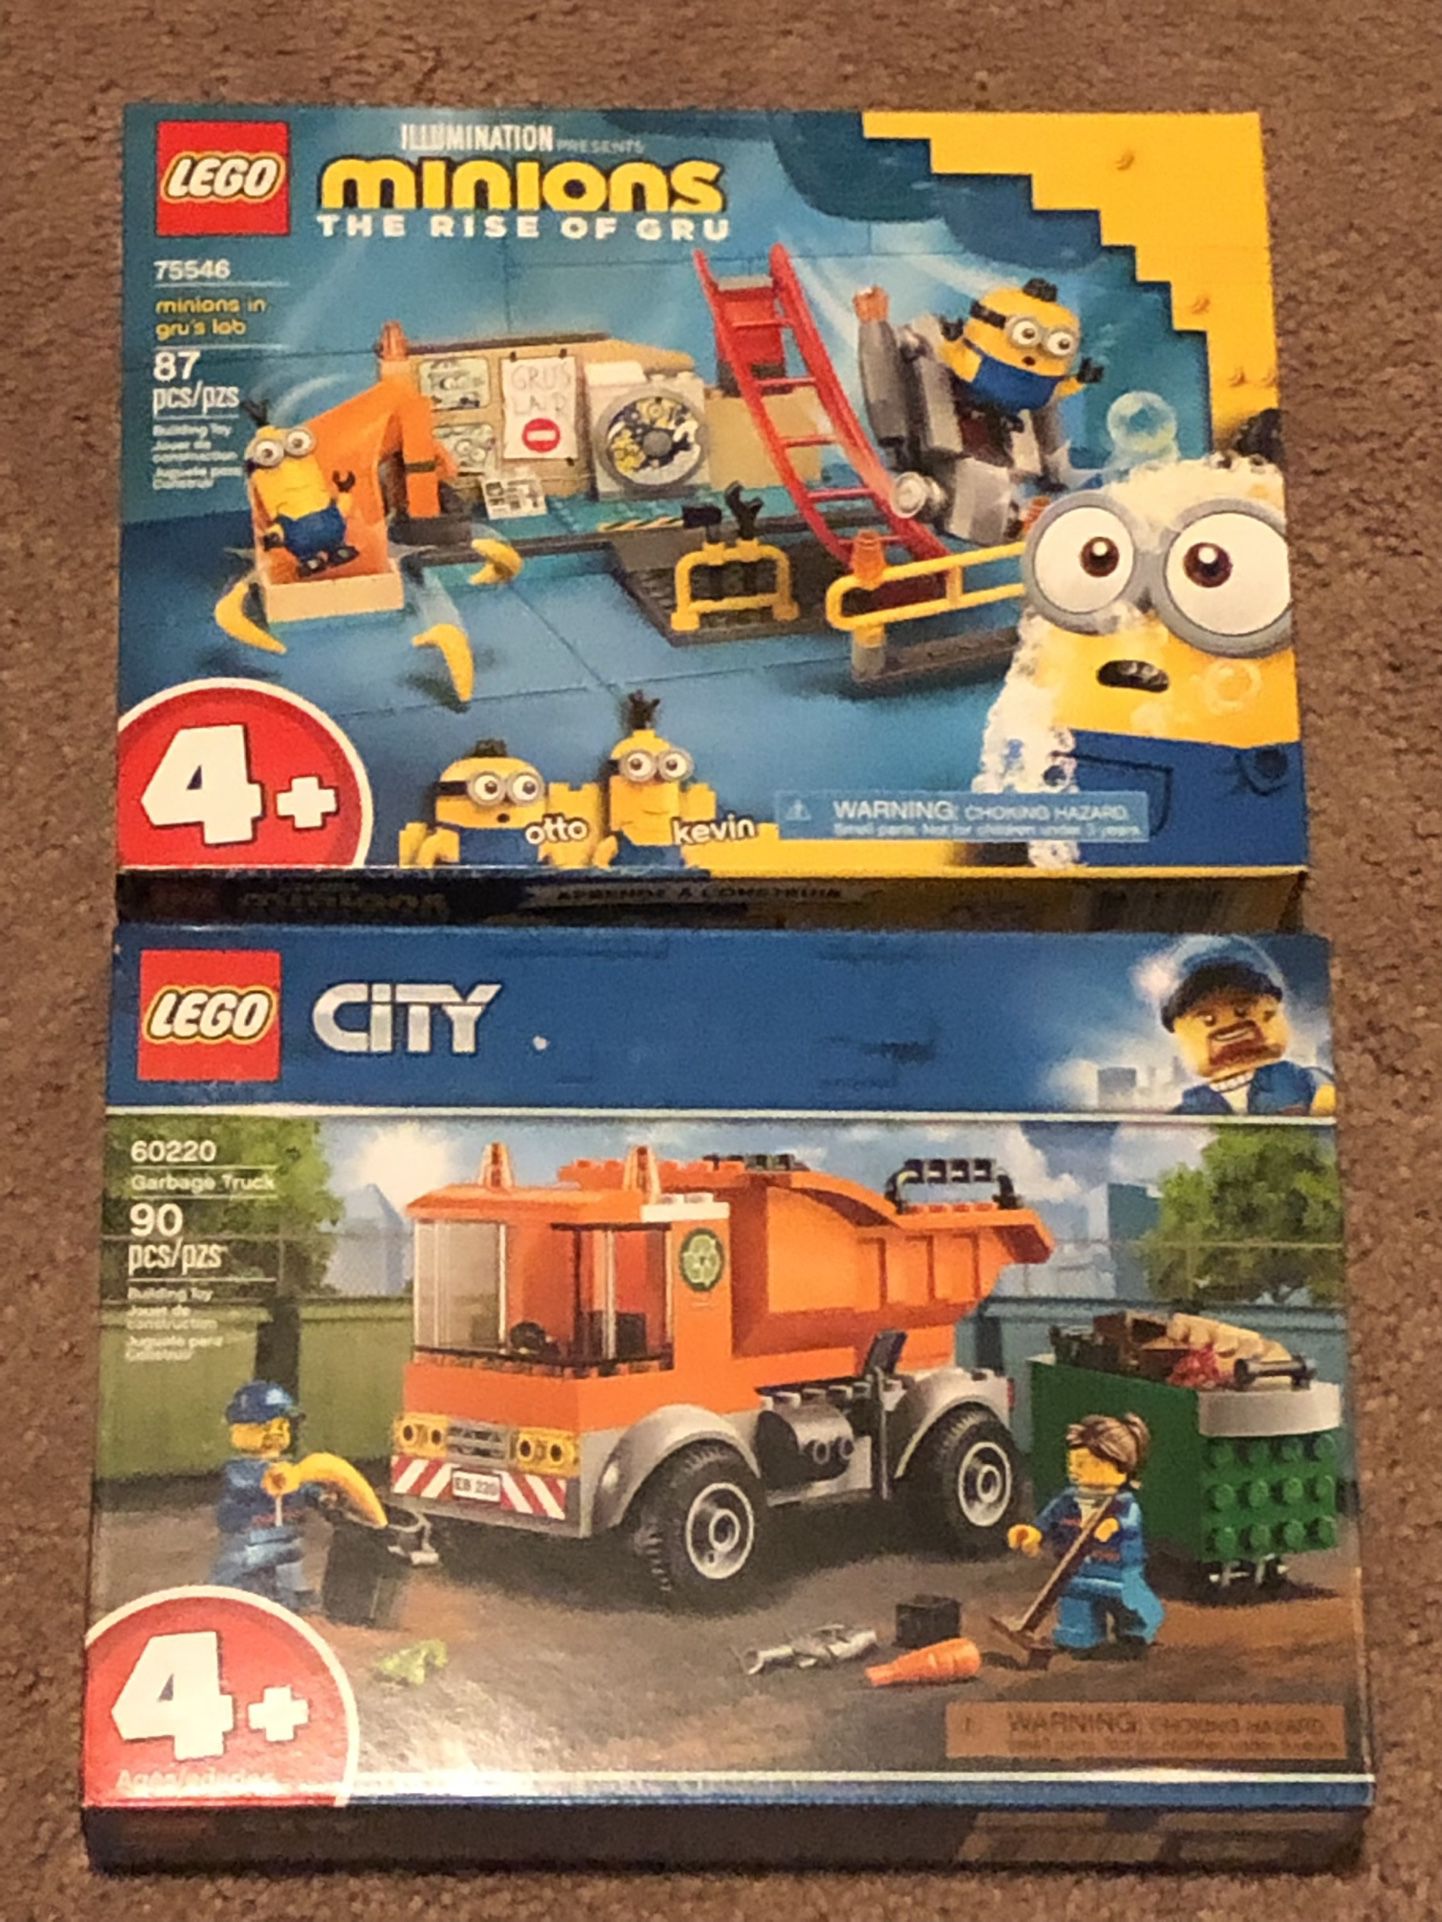 Lot Of 2 Brand New Unopened LEGO Sets . $30.00 Firm For Both. 